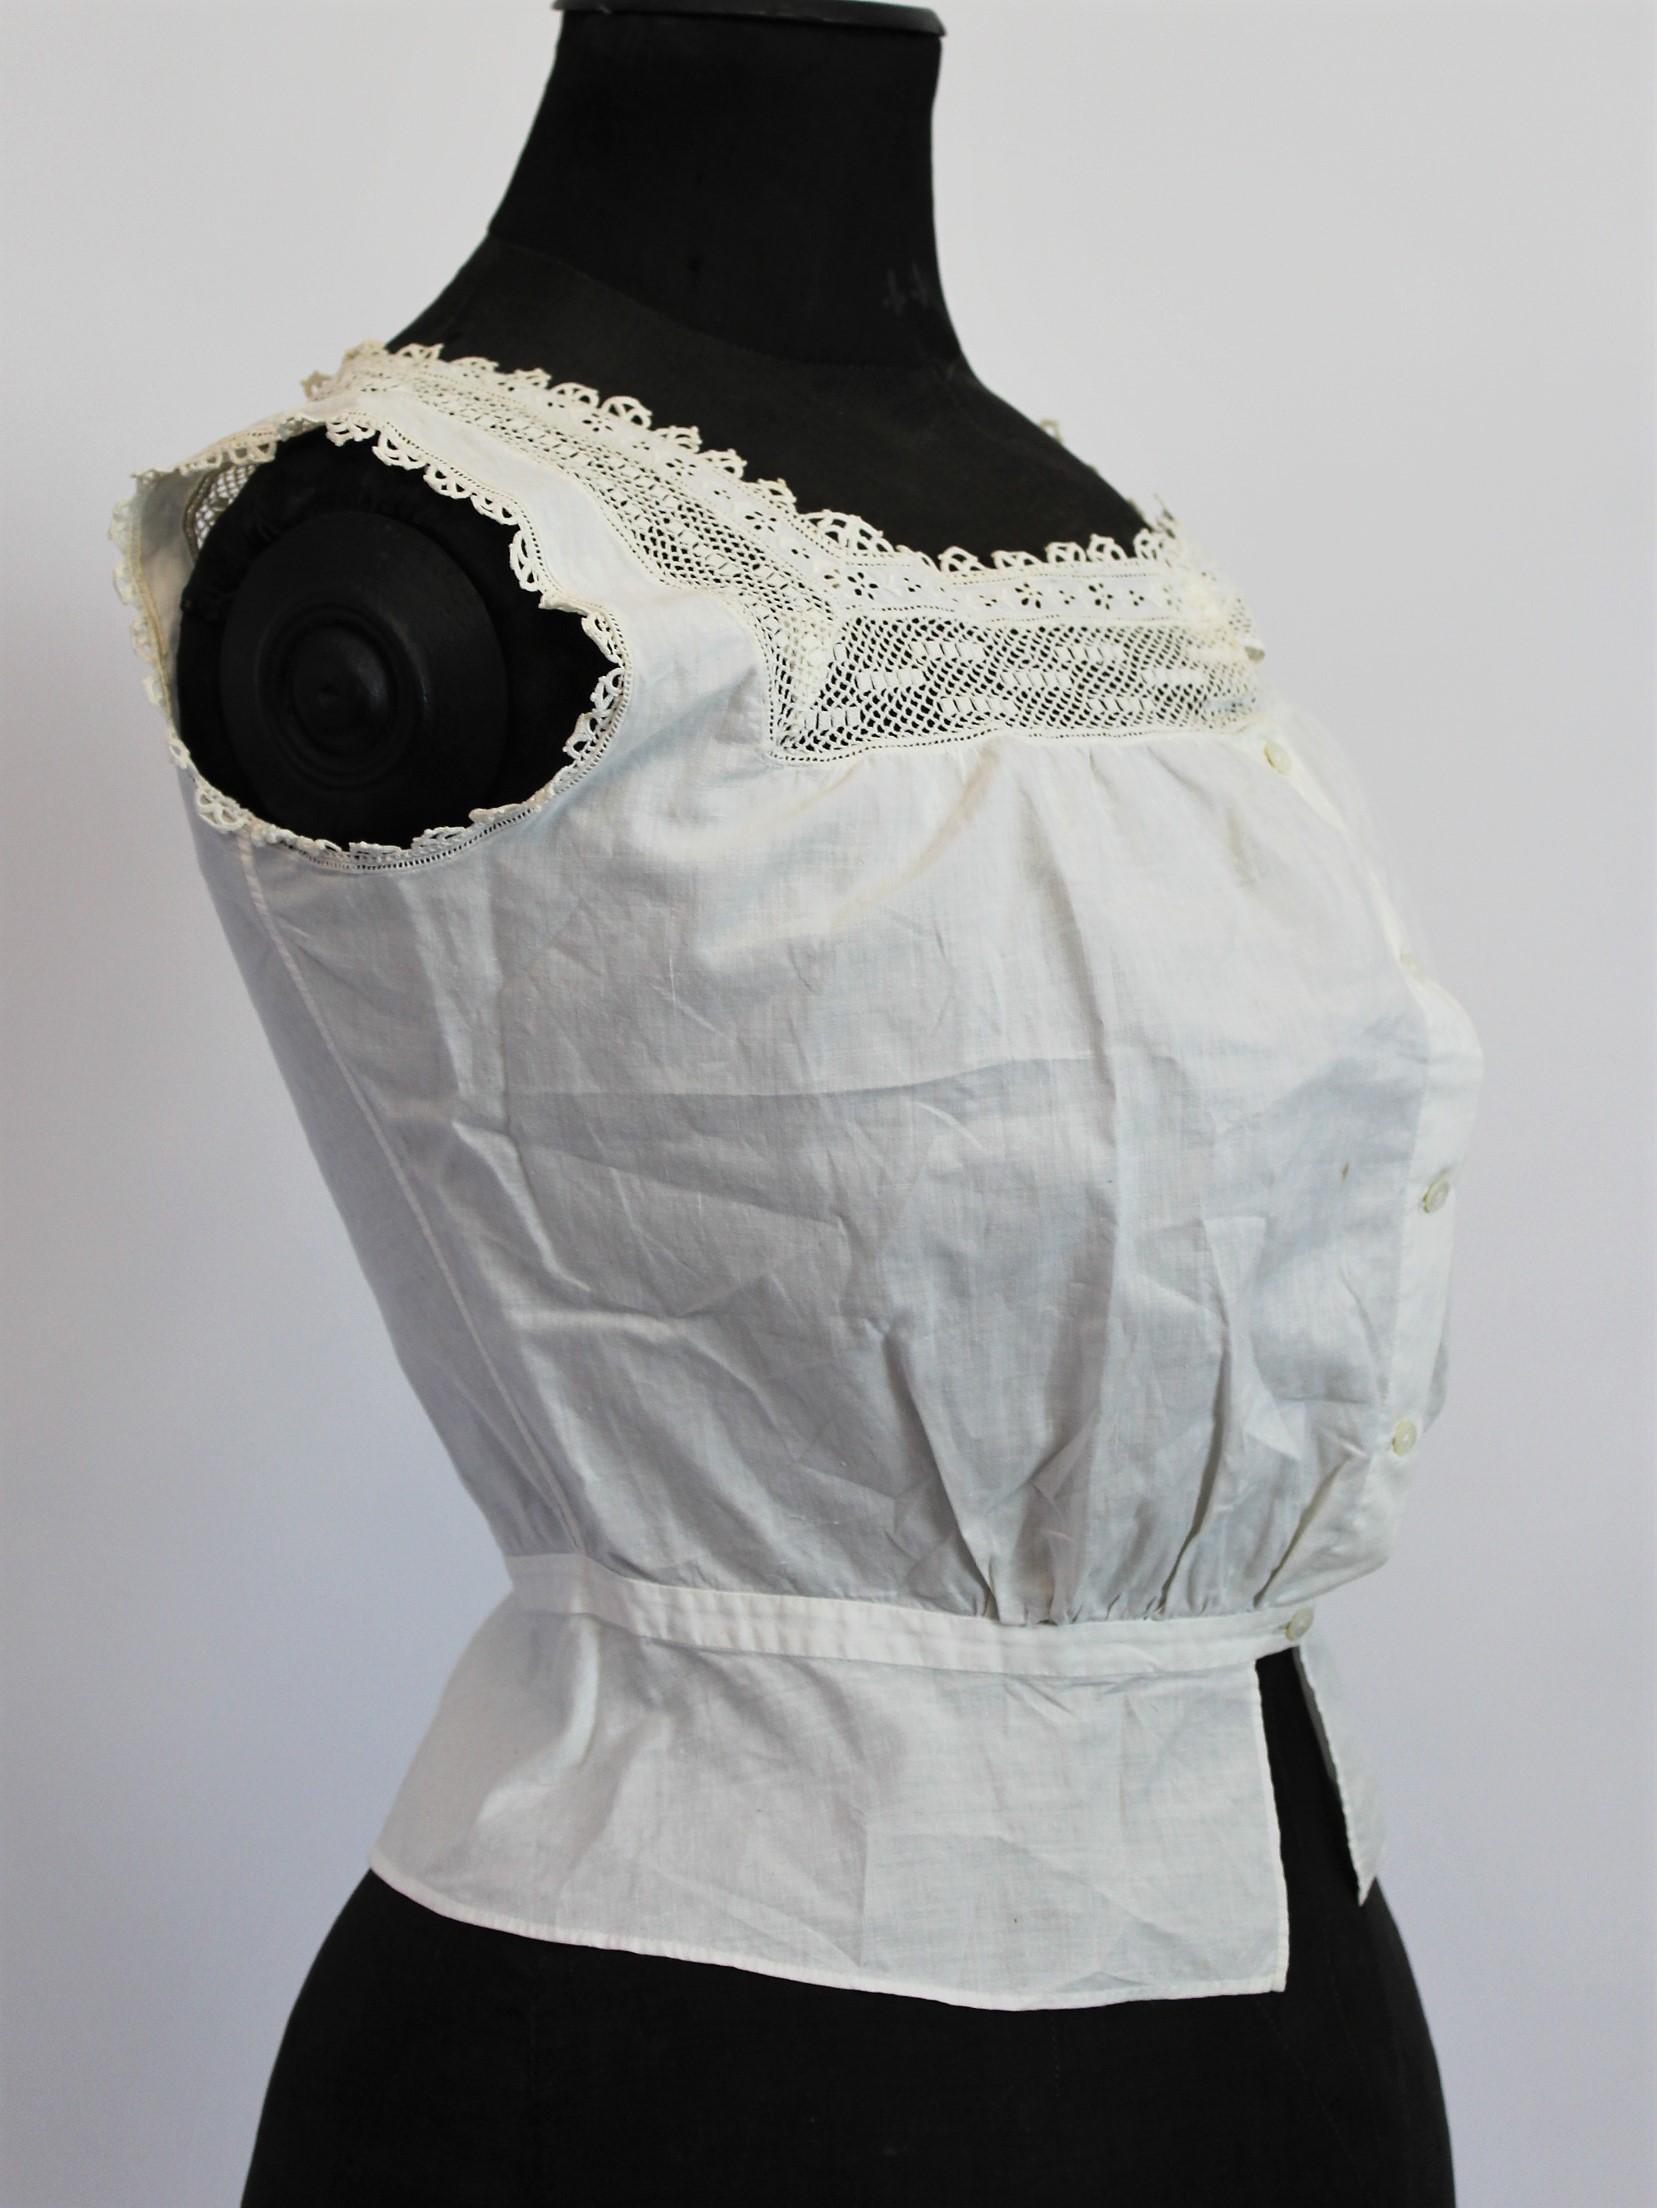 Edwardian corset (used with permission of Harman Hay)